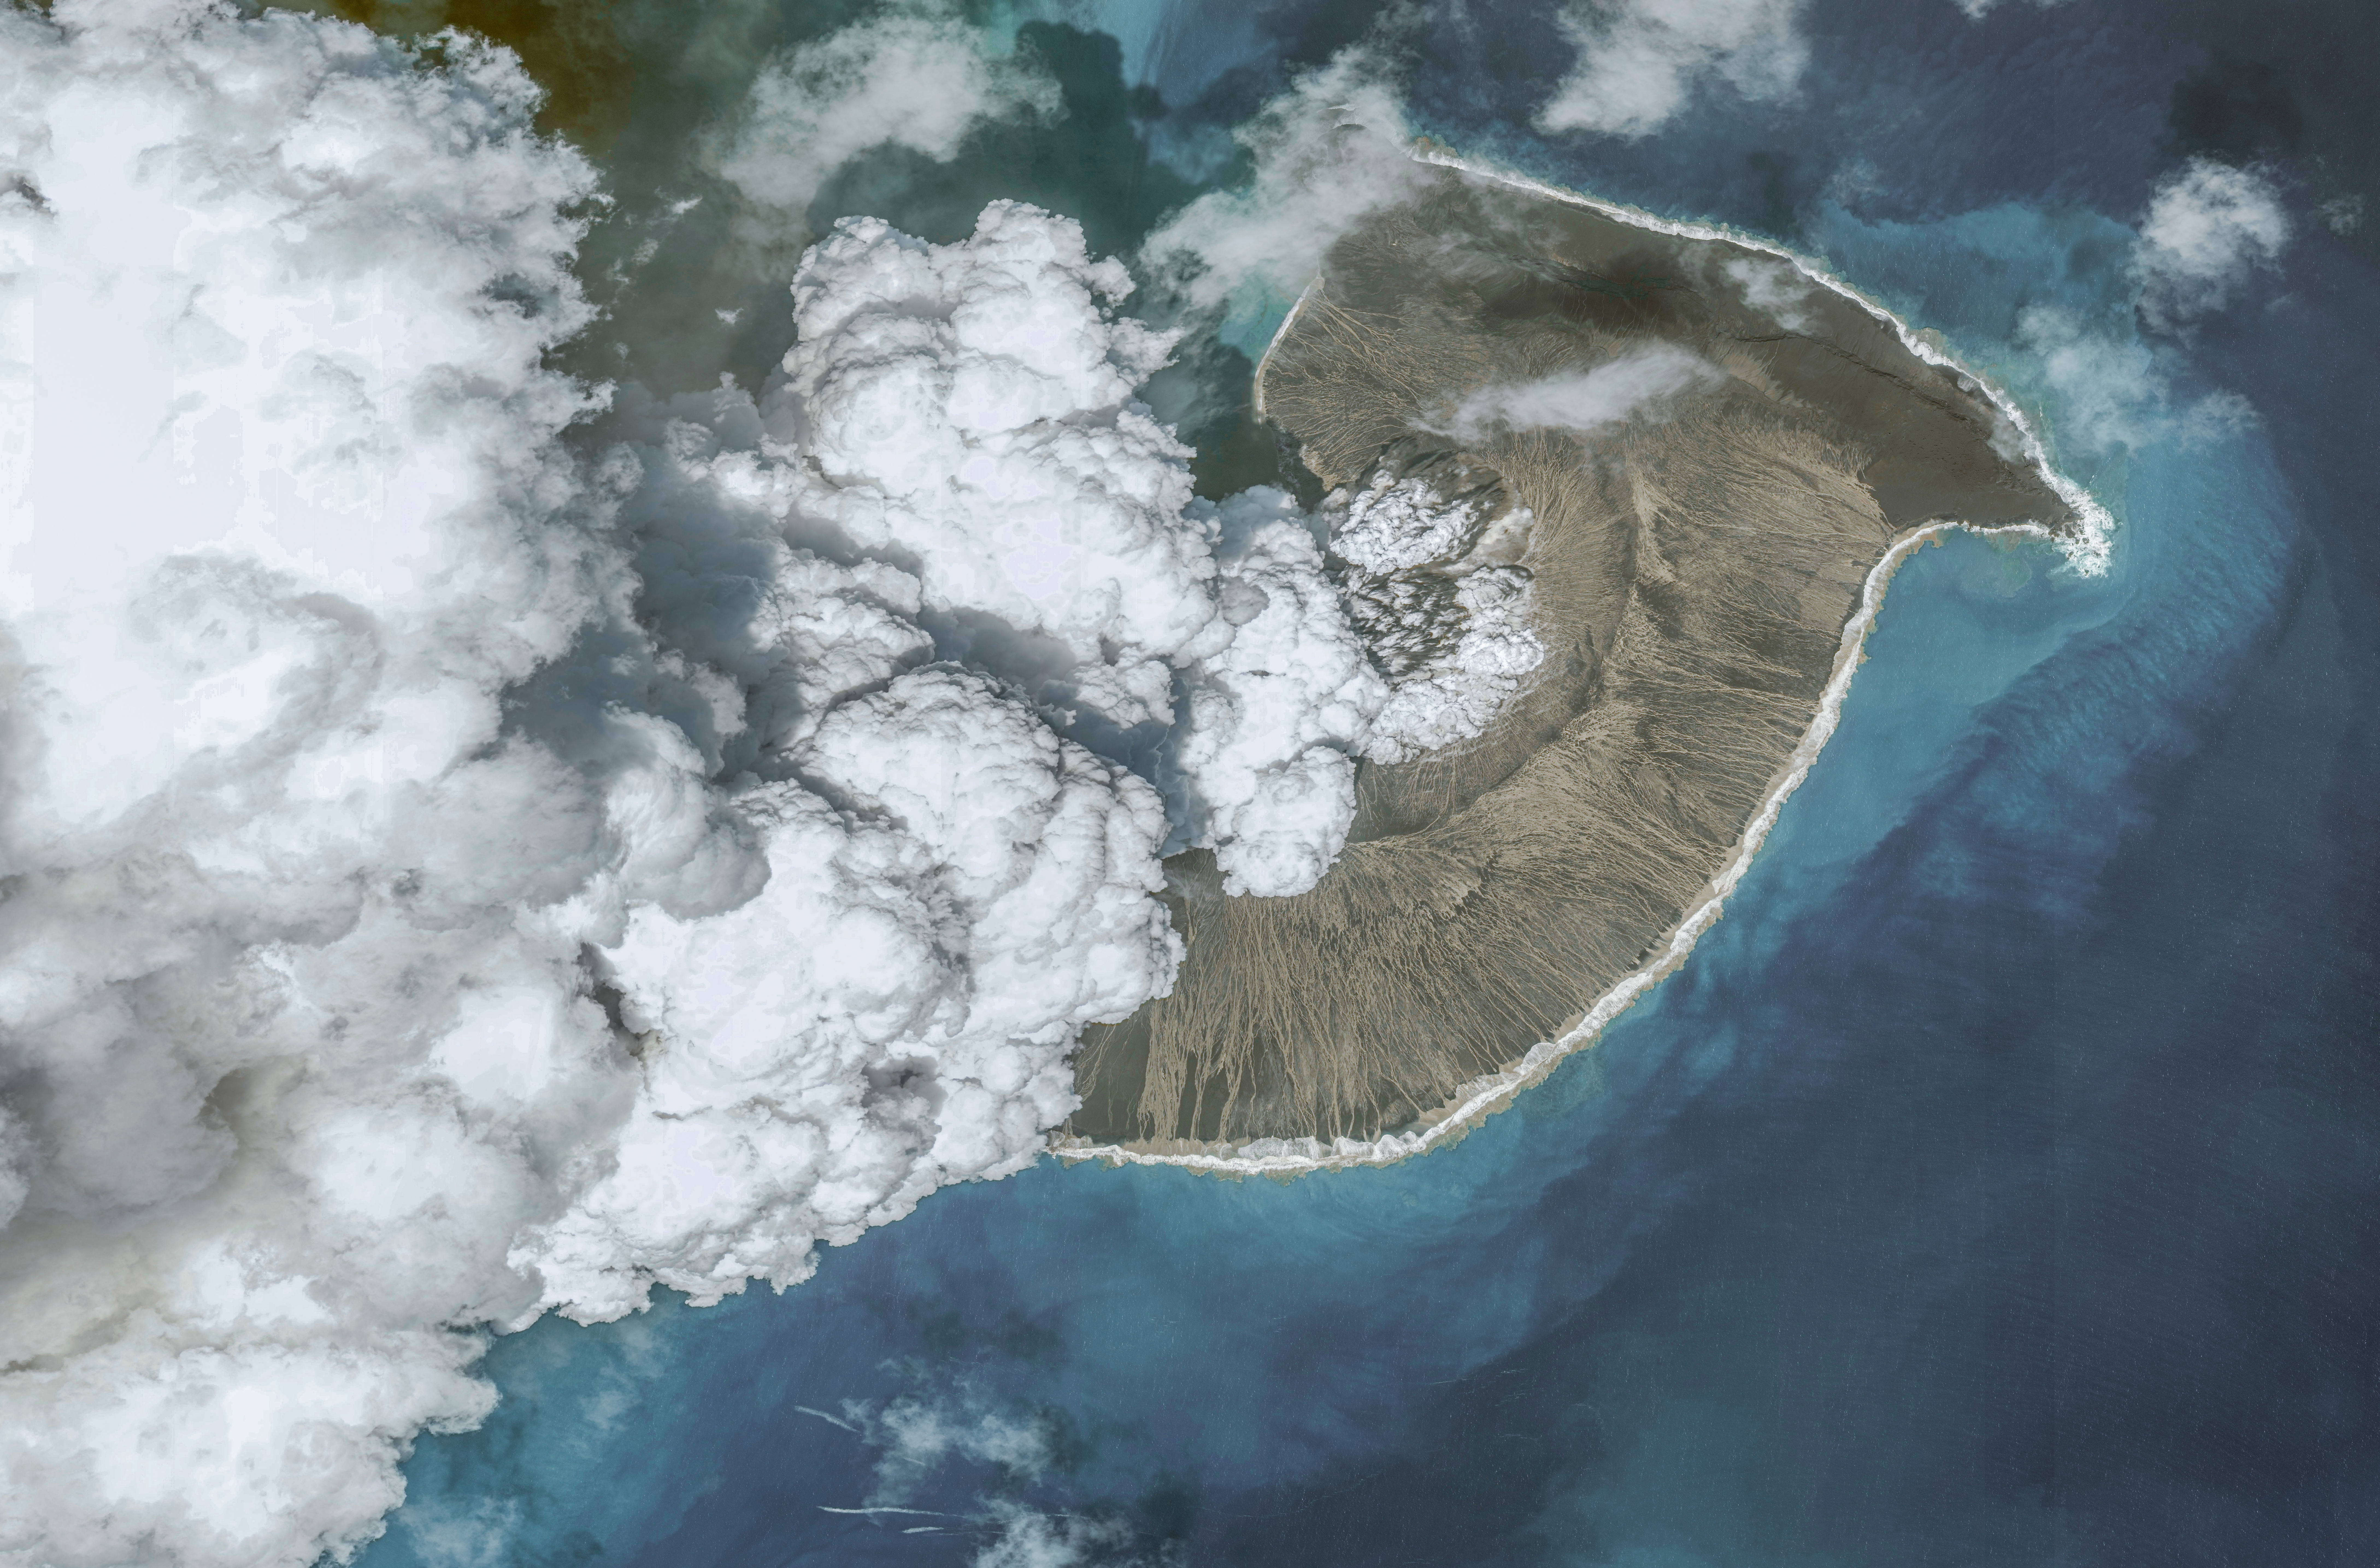 Tonga survived the largest volcanic plume in the planet’s history this year